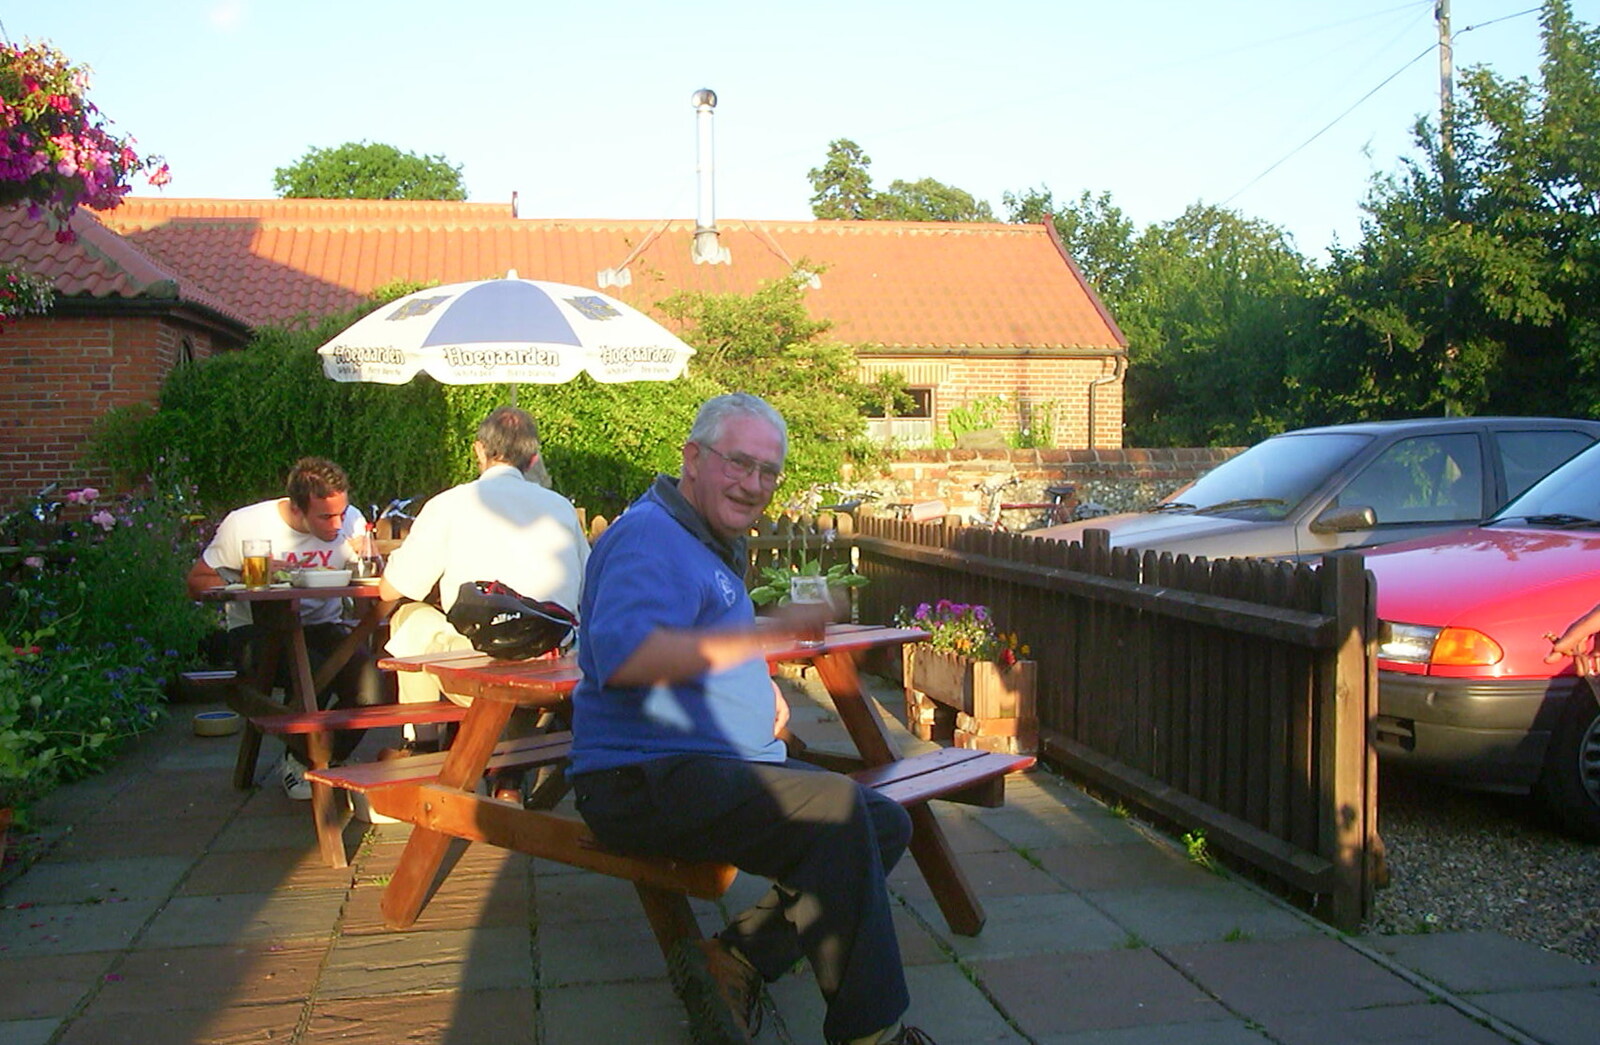 Bomber Langdon at Thelnetham from BSCC Rides, Petanque at the Swan and July Miscellany - 21st July 2002